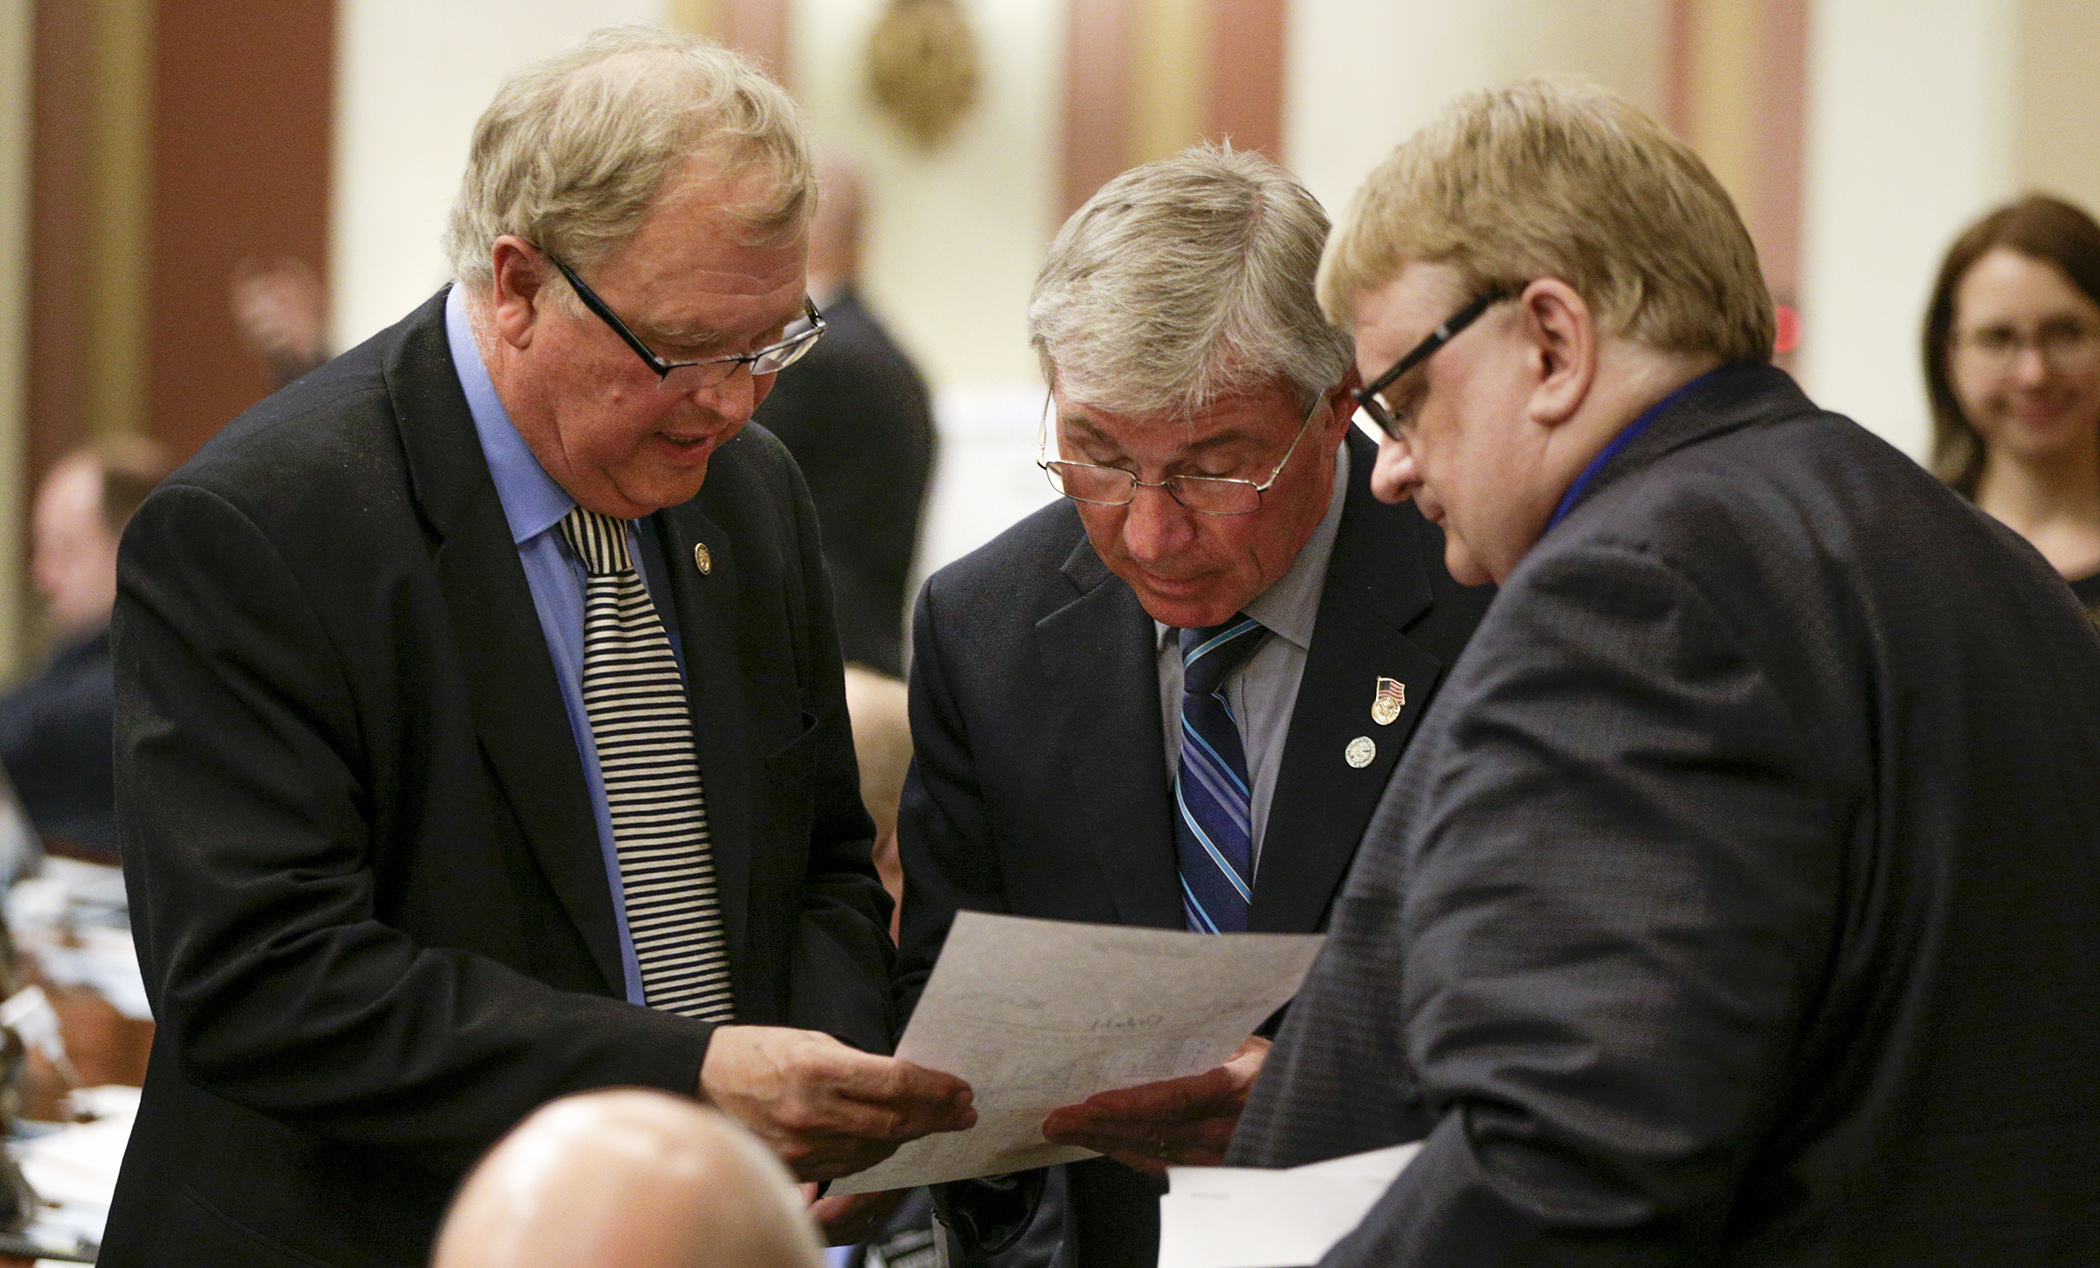 Rep. Dean Urdahl, from left, Rep. Bob Dettmer and Rep. Duane Quam check the vote register after the omnibus capital investment bill failed to get the three-fifths majority needed to pass May 17. Photo by Paul Battaglia